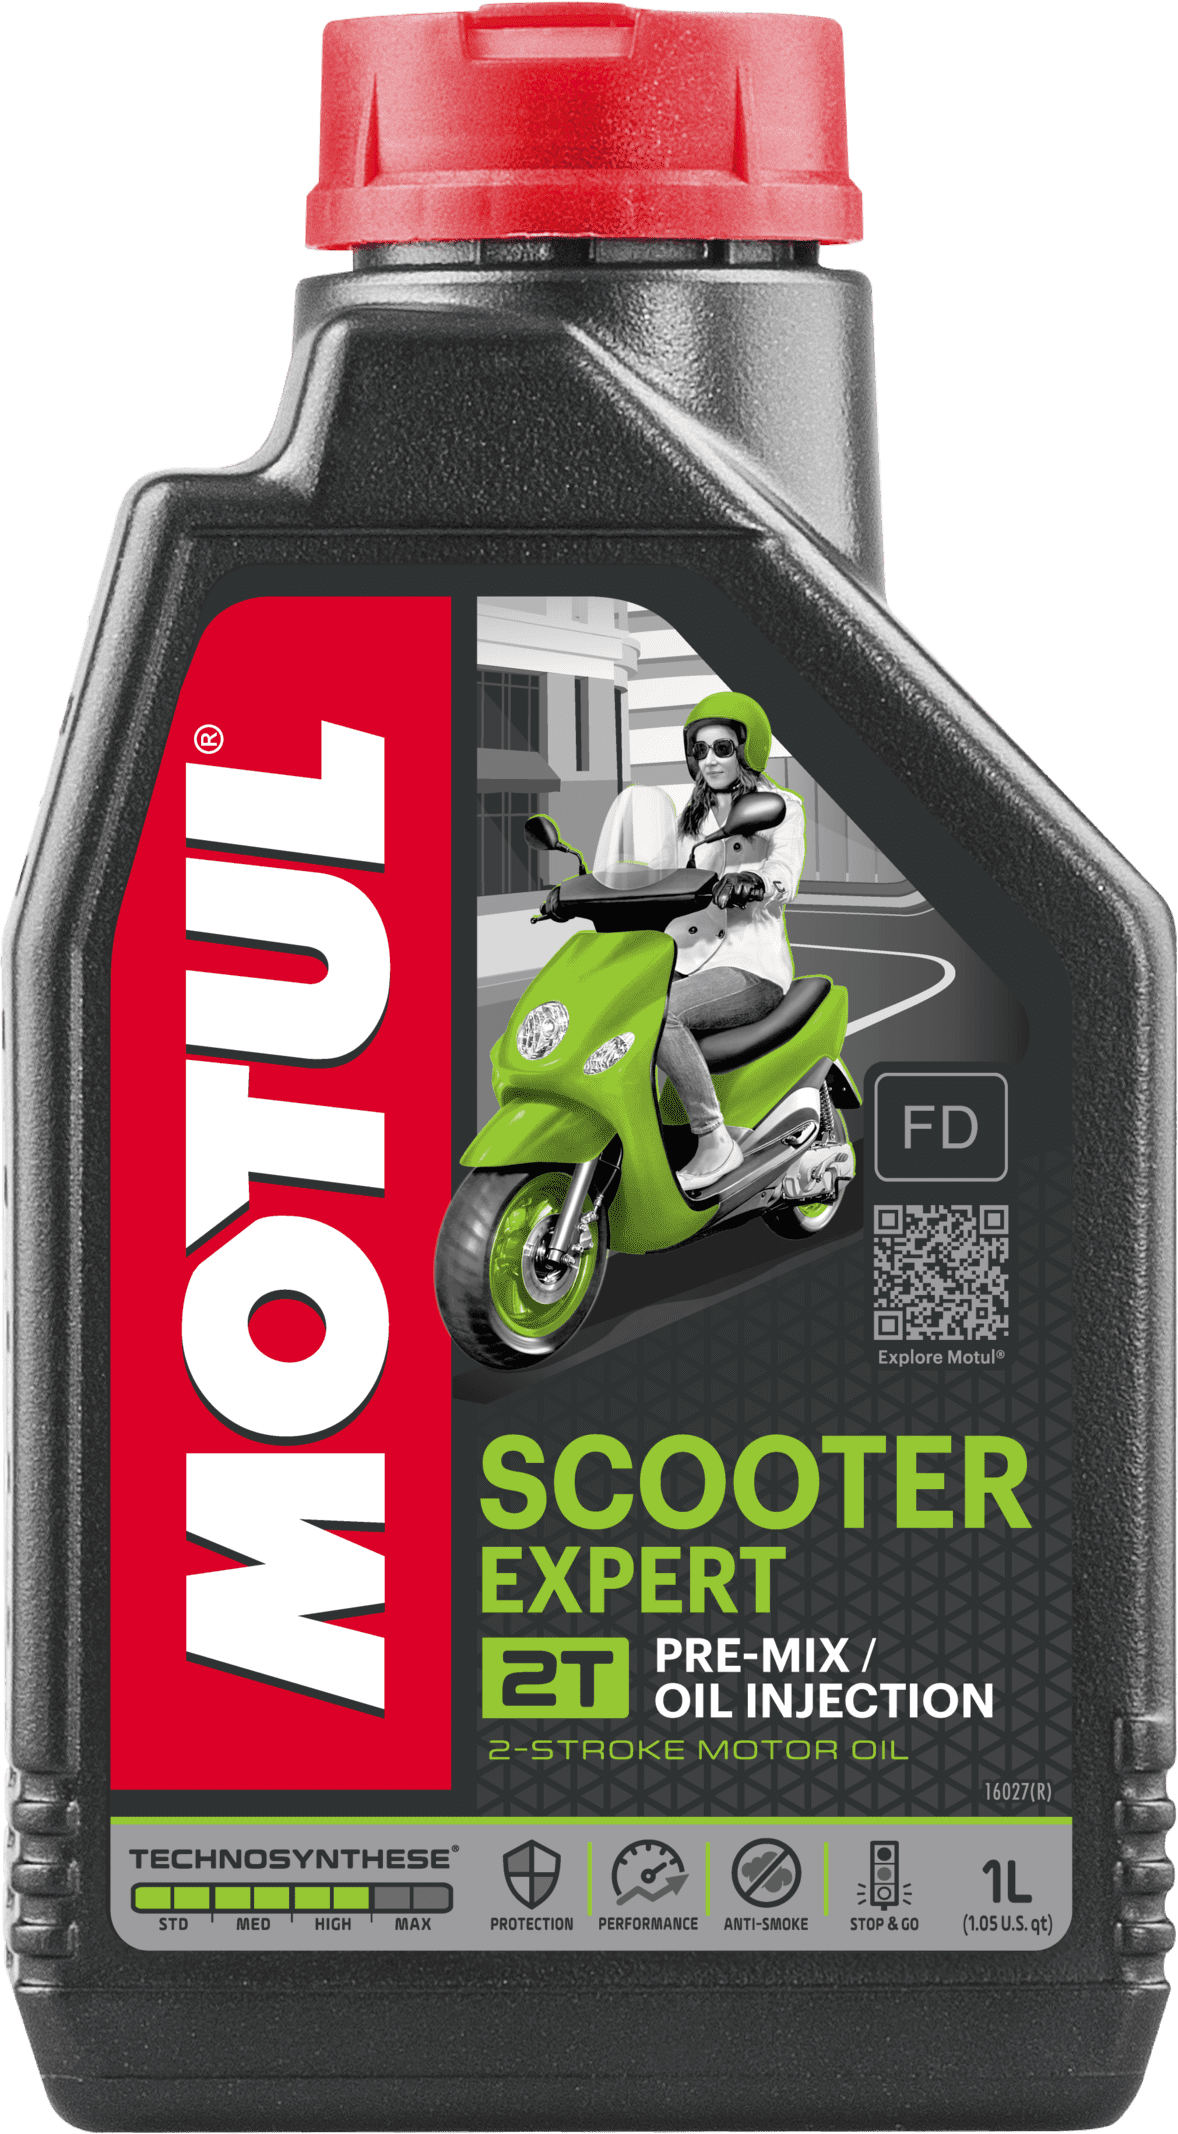 105880-1 Synthetic Technosynthese® lubricant for 2-Stroke scooter engines with premix or injector lube system, operating at high rpm.